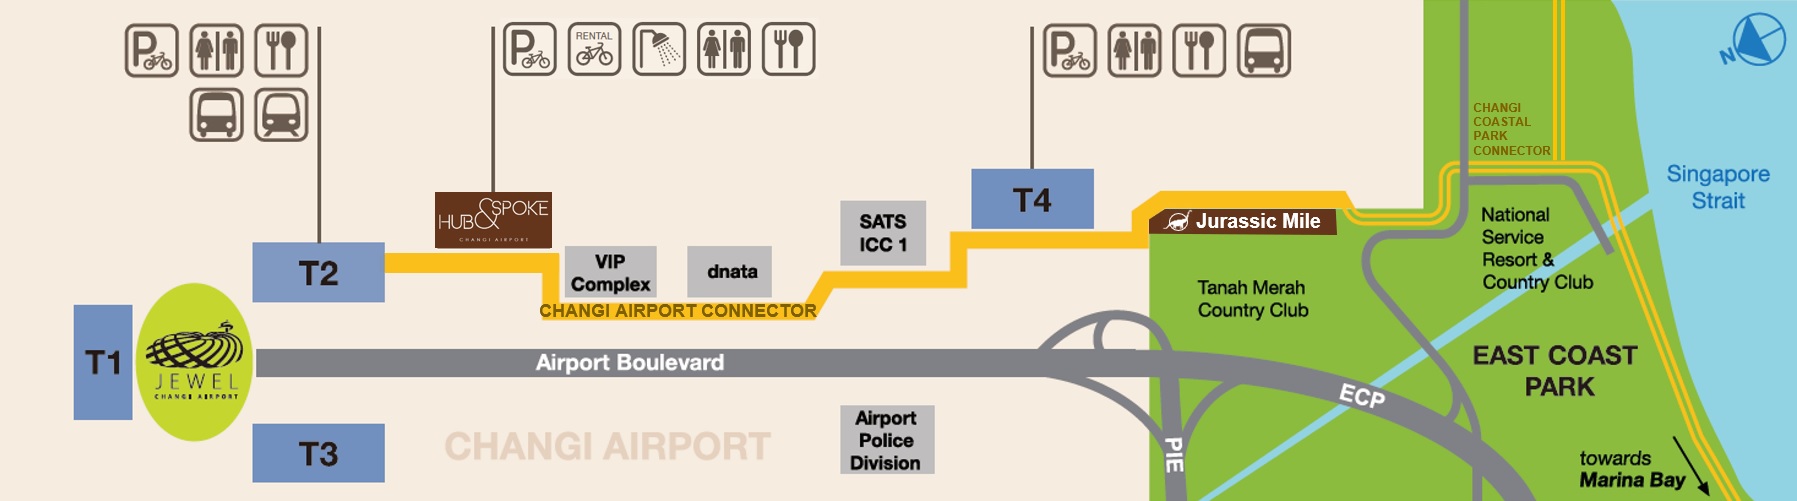 Getting There 👣, Changi Airport Connector